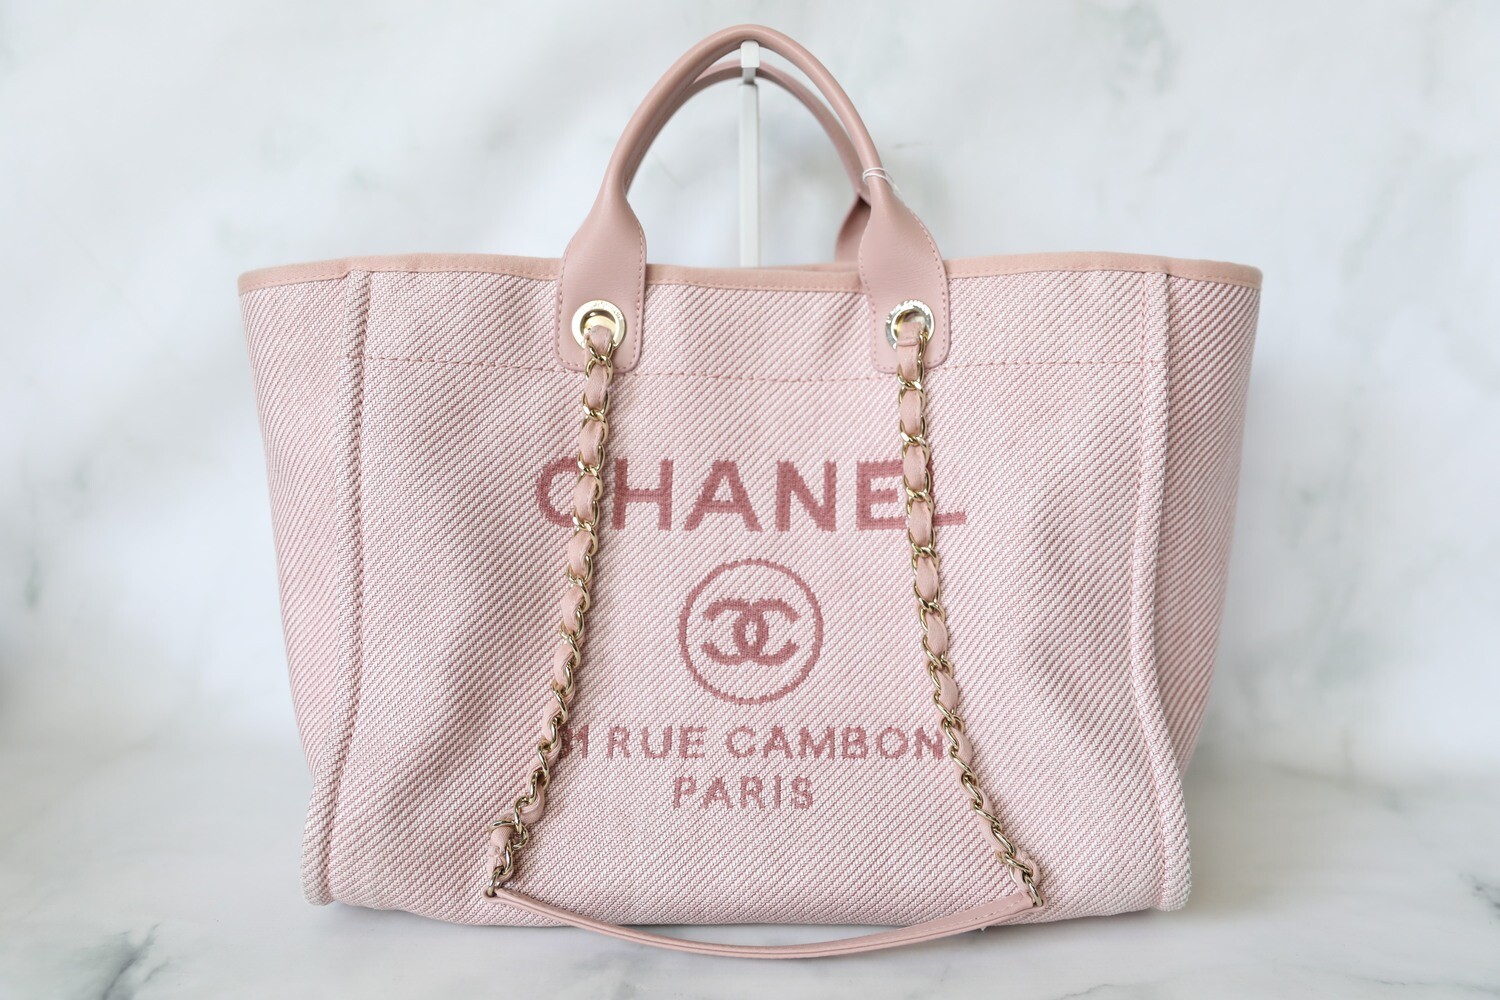 Chanel Deauville Large, Pink and White Striped Canvas with Shiny